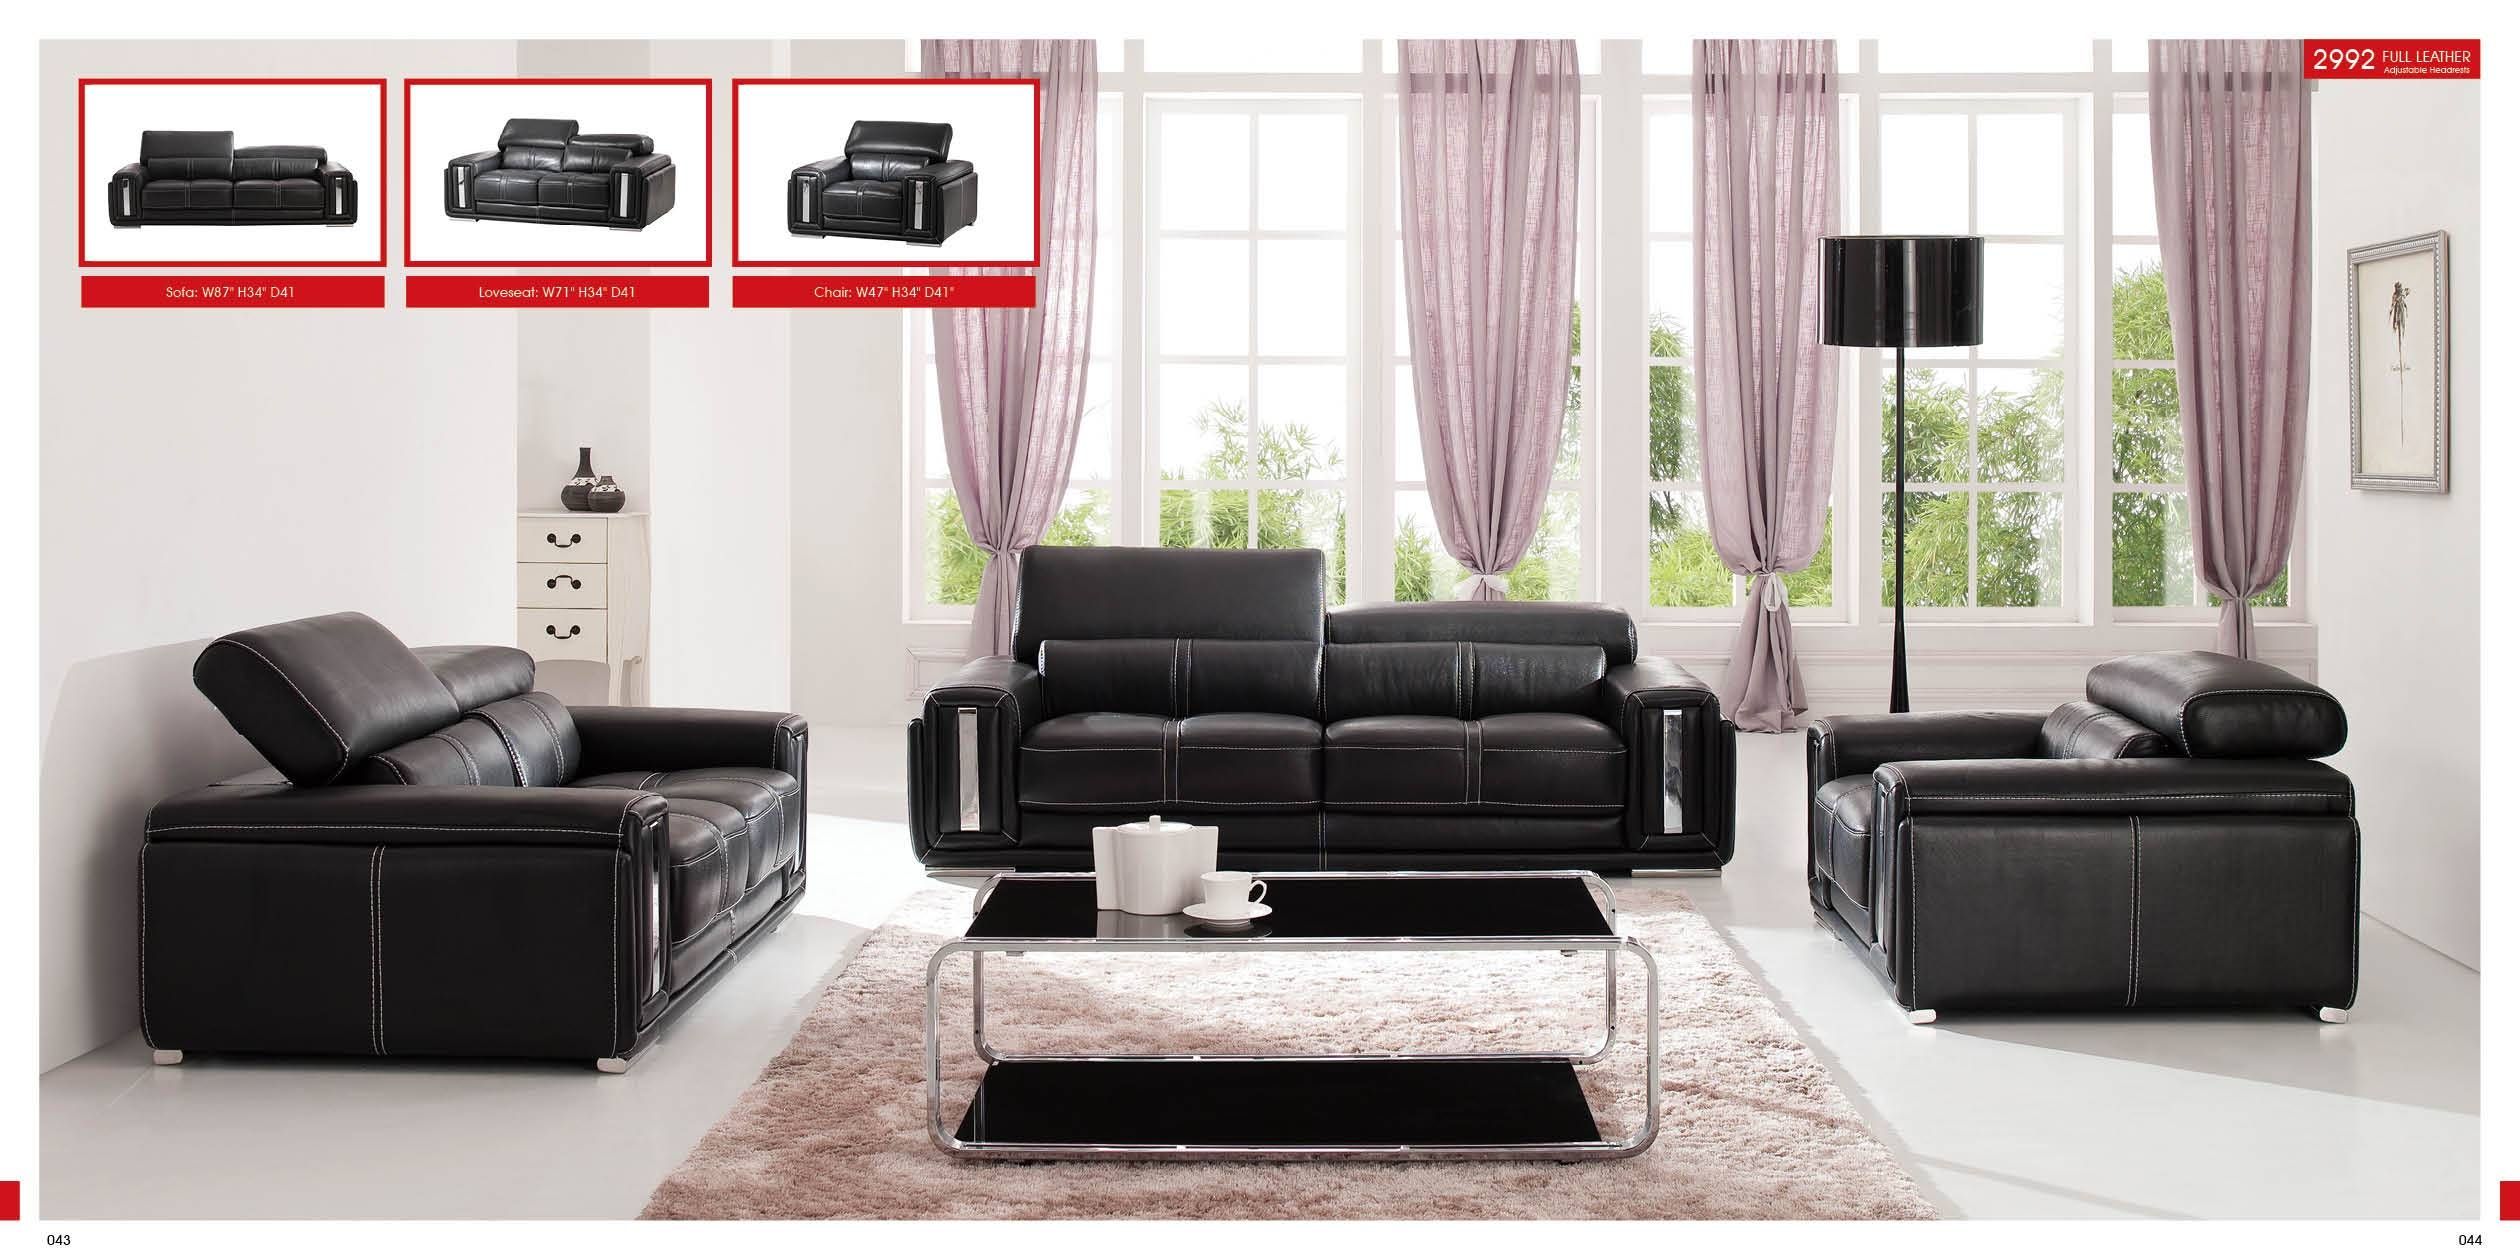 Living Room Sofa Set | Home Design Ideas Within Living Room Sofa And Chair Sets (View 3 of 15)